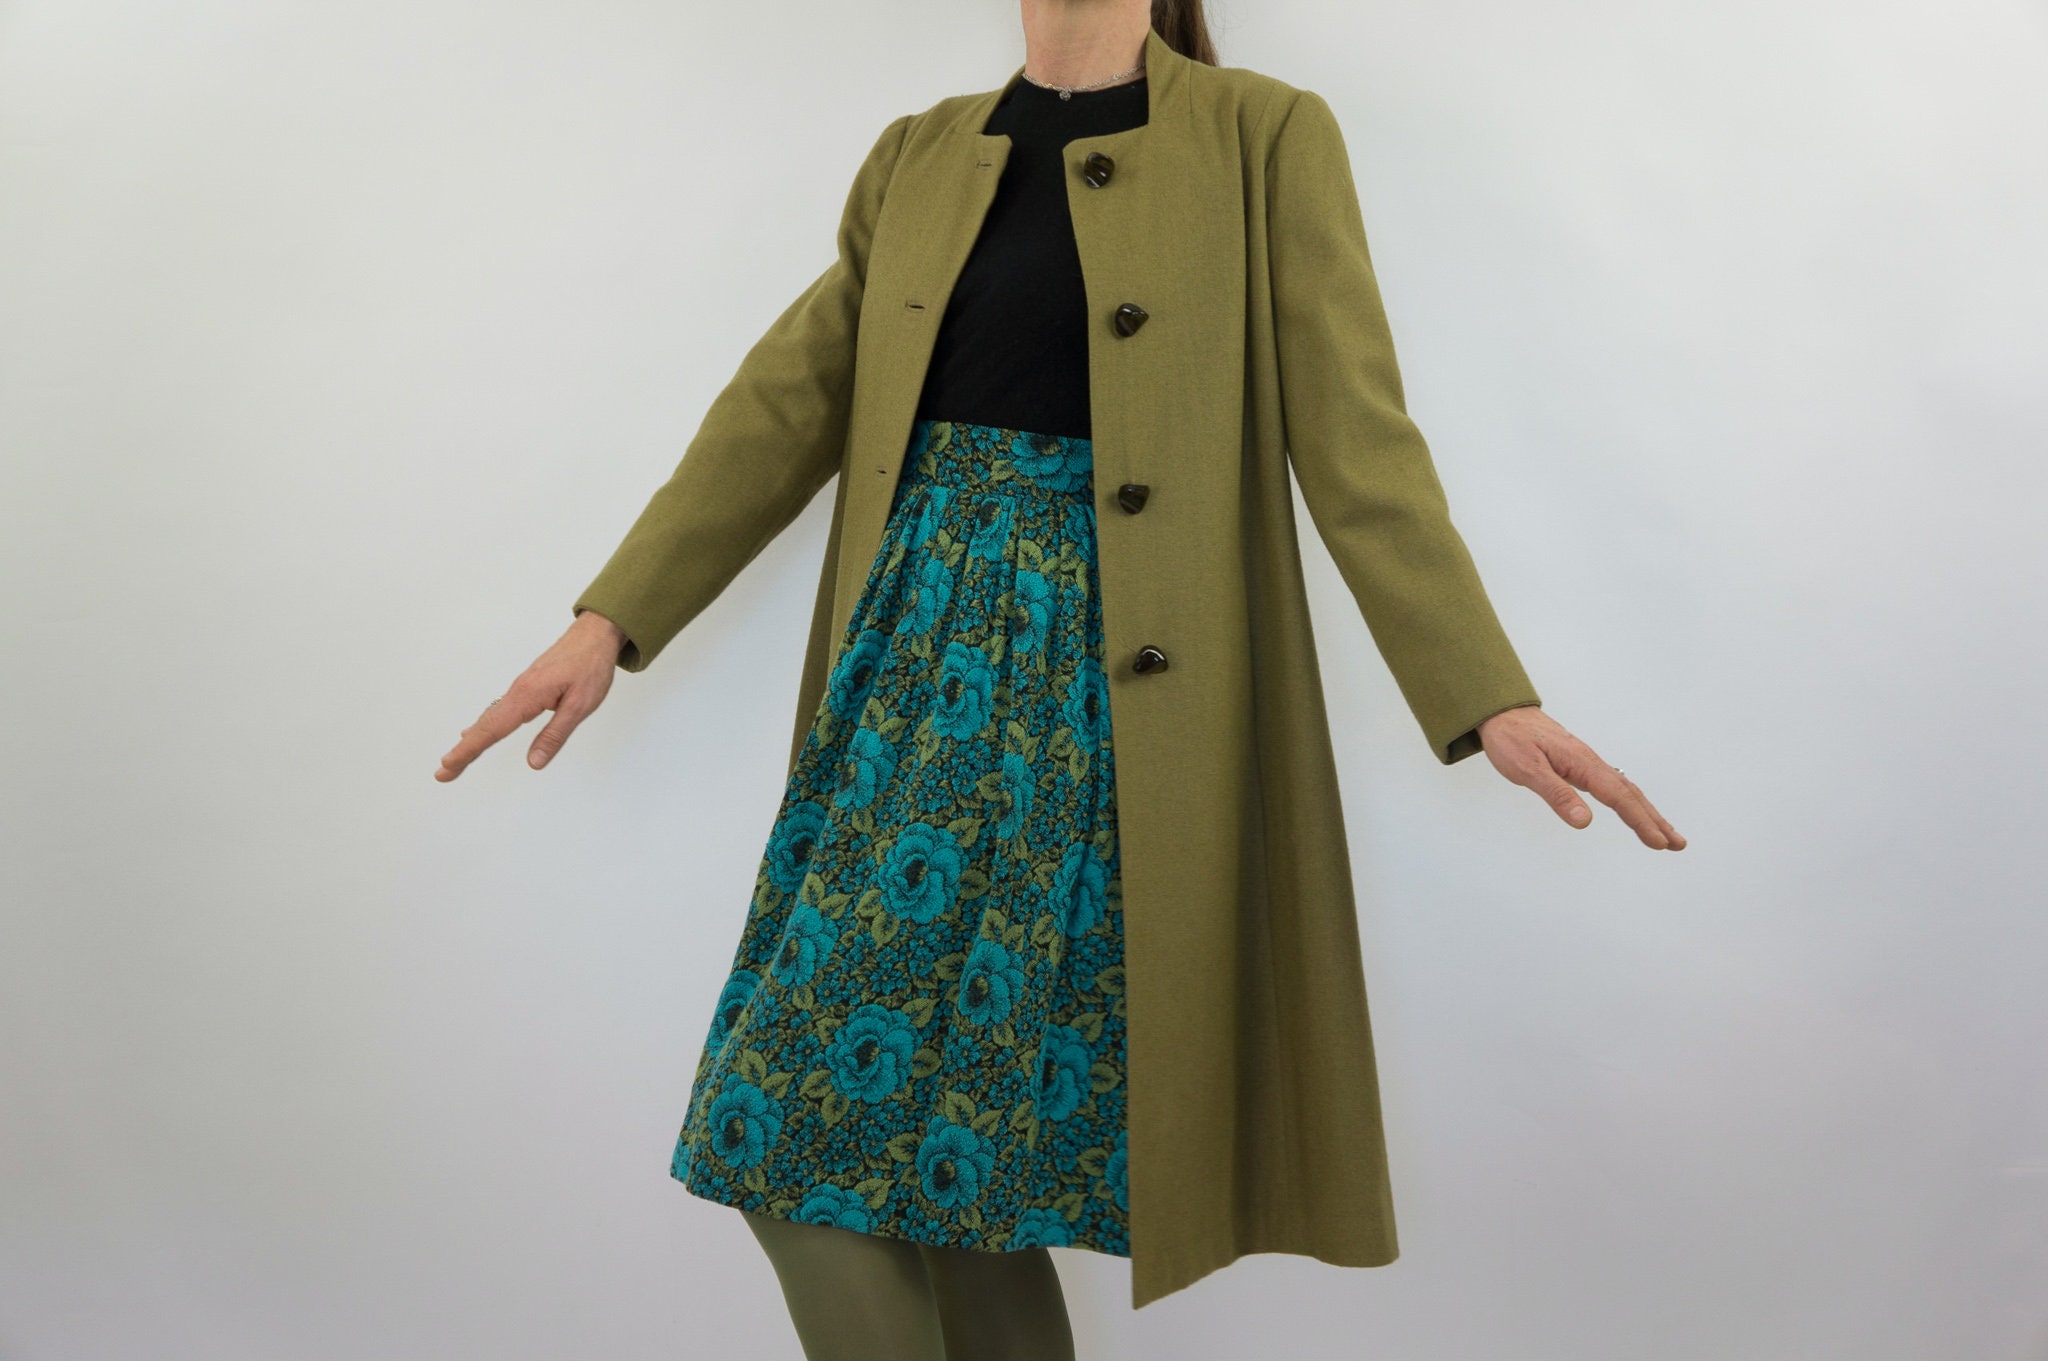 Vintage A-line Coat 1950/60s Mod Coat Olive Green Trapeze Coat Wool Coat  Square Collar Twiggy Coat Made in France Size S/M 